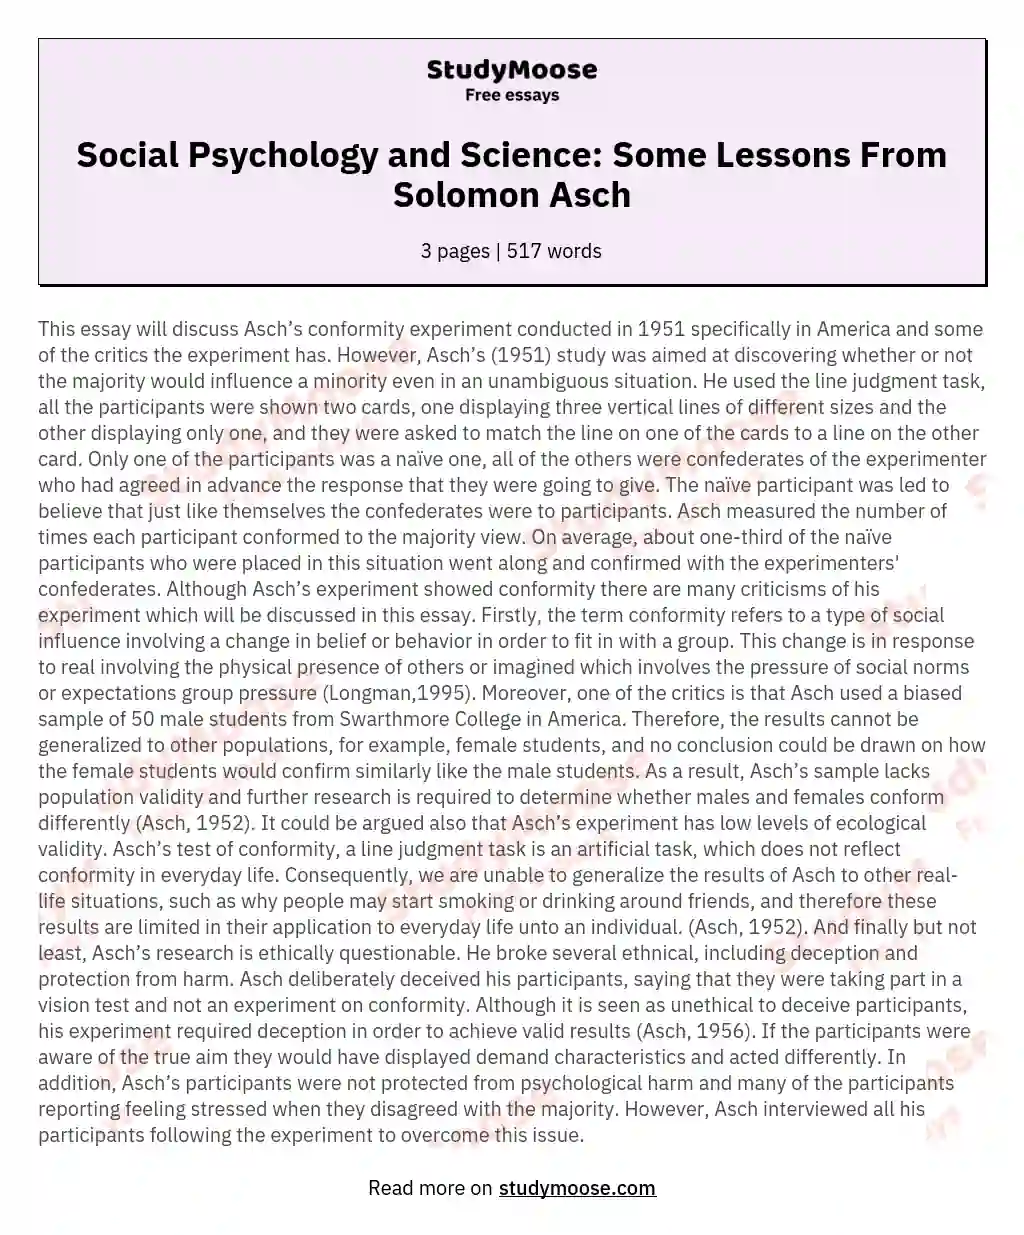 Social Psychology and Science: Some Lessons From Solomon Asch